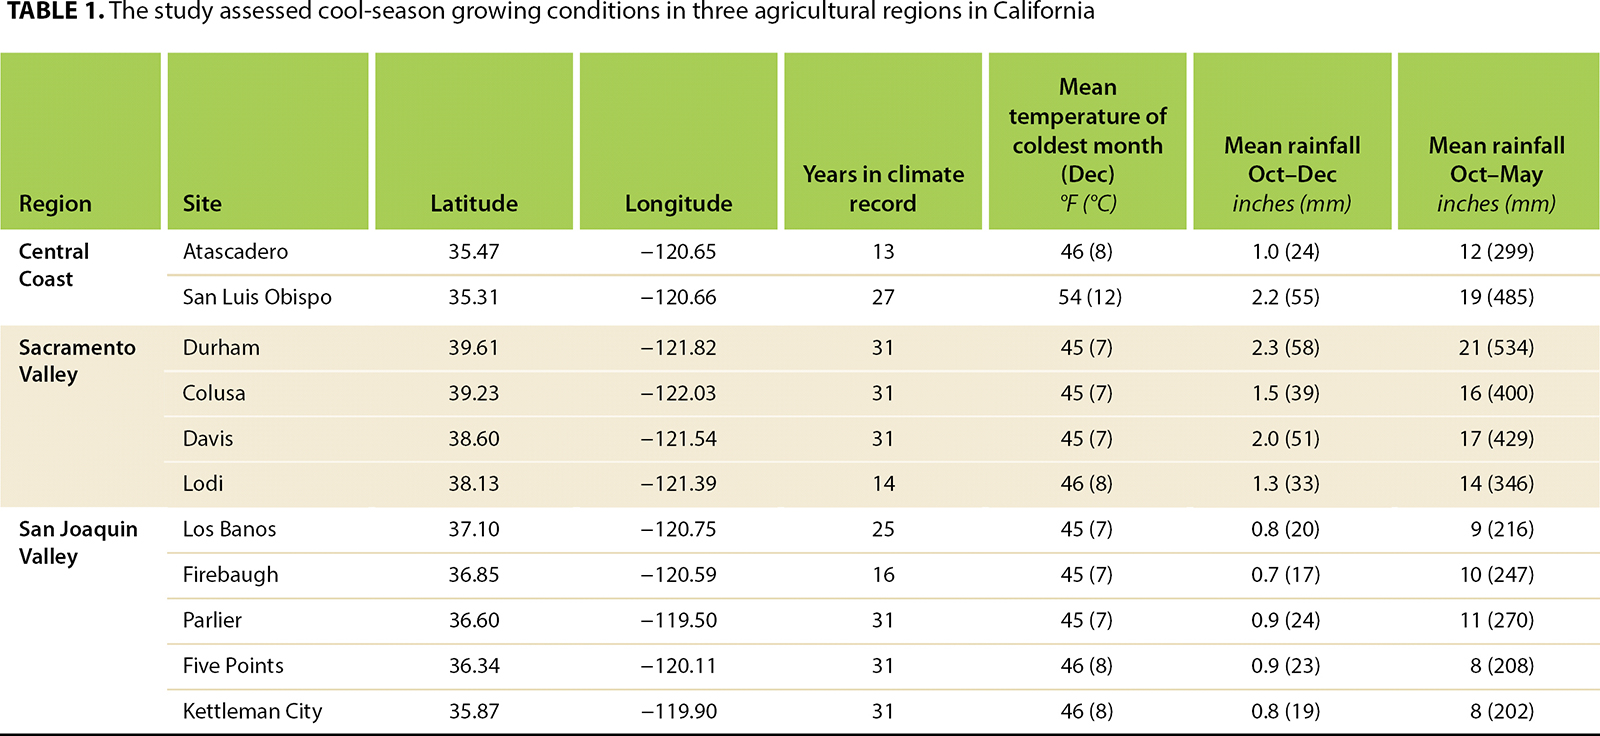 The study assessed cool-season growing conditions in three agricultural regions in California